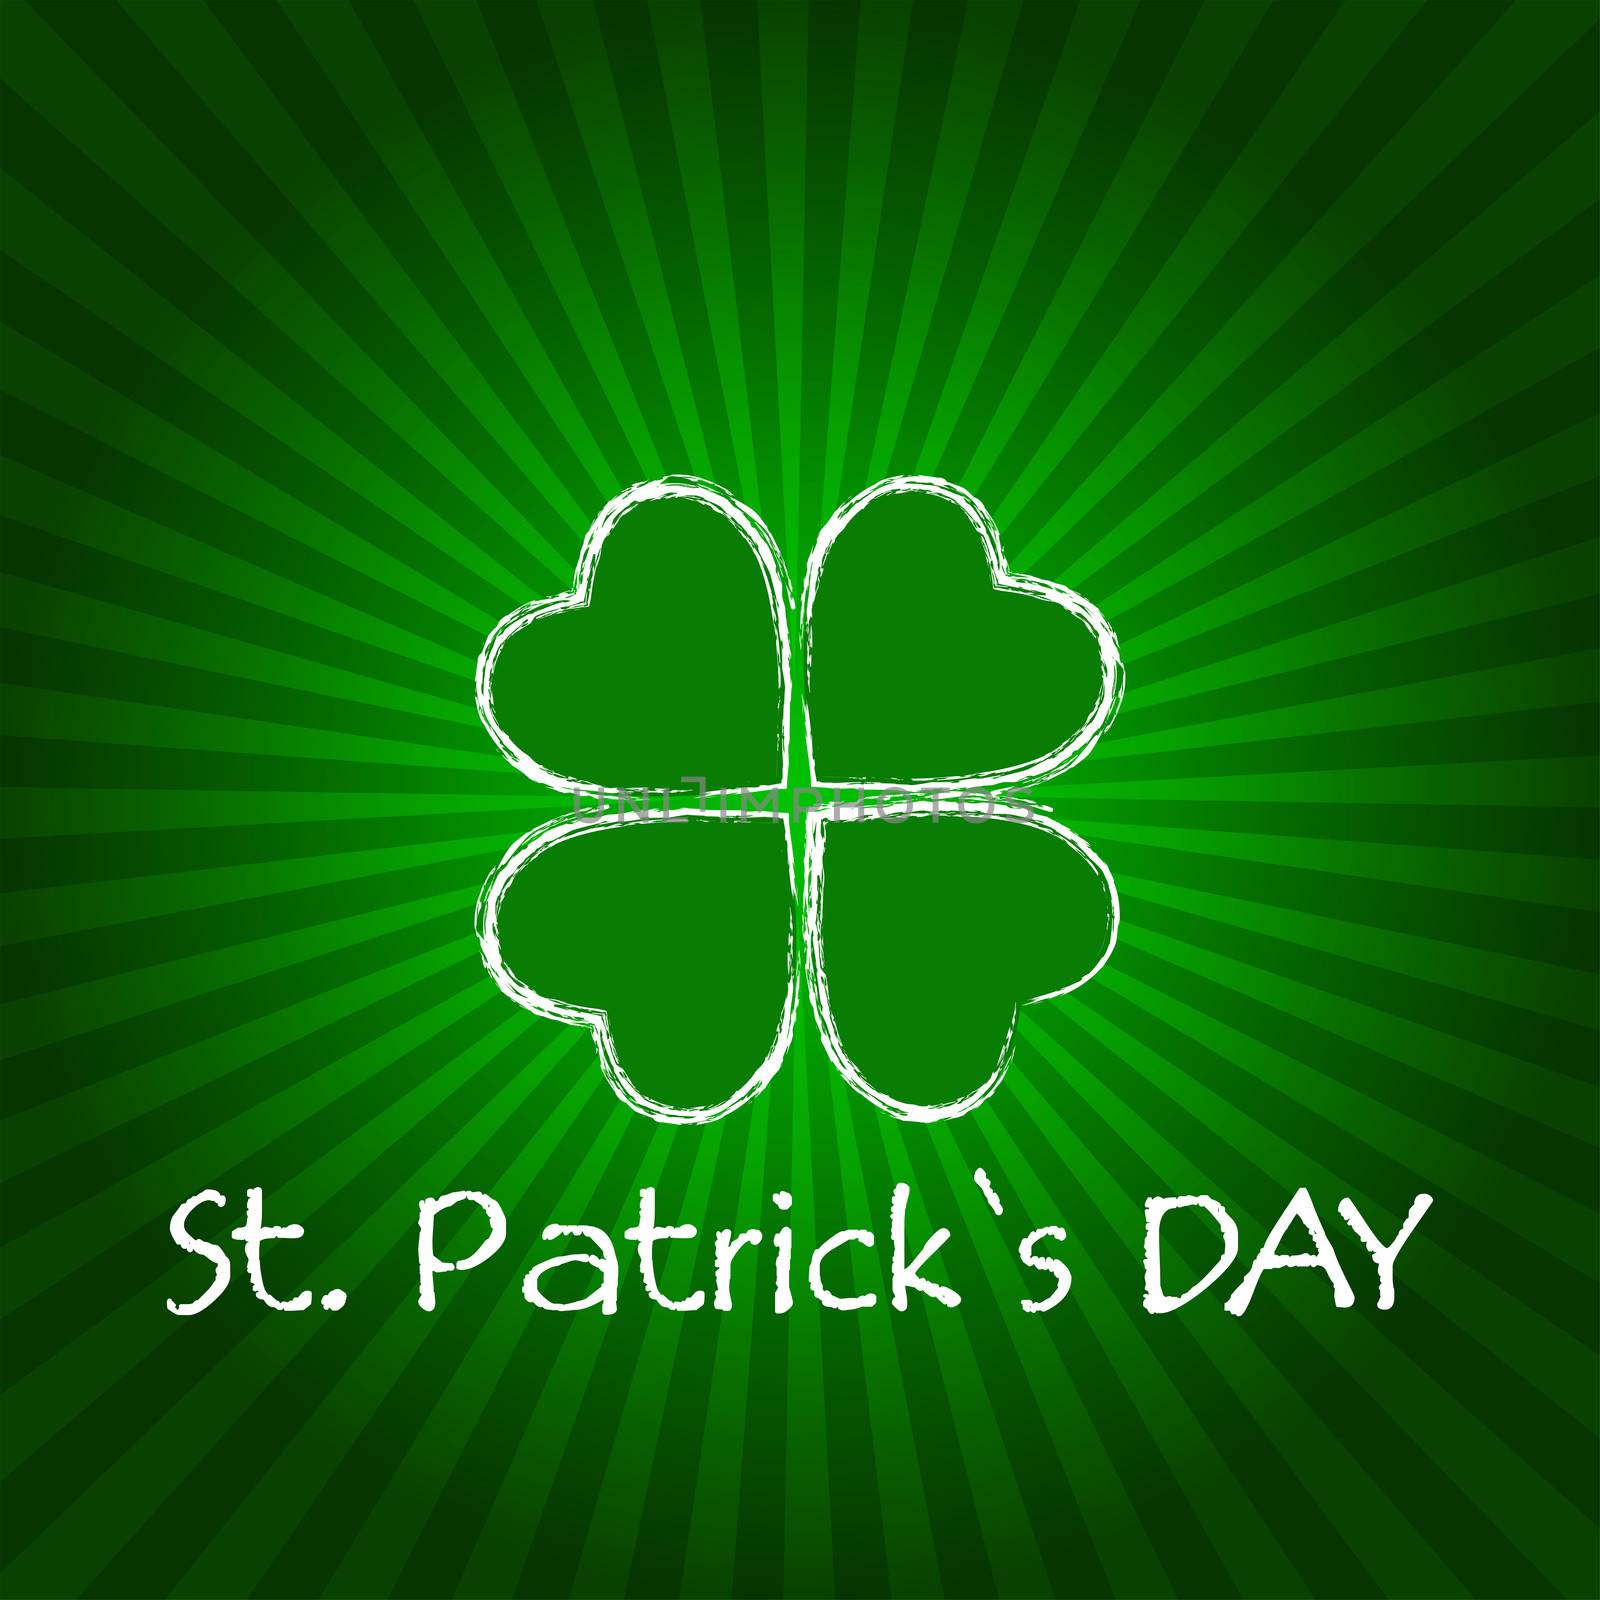 St. Patrick's Day text with green shamrock and striped rays, holiday seasonal concept